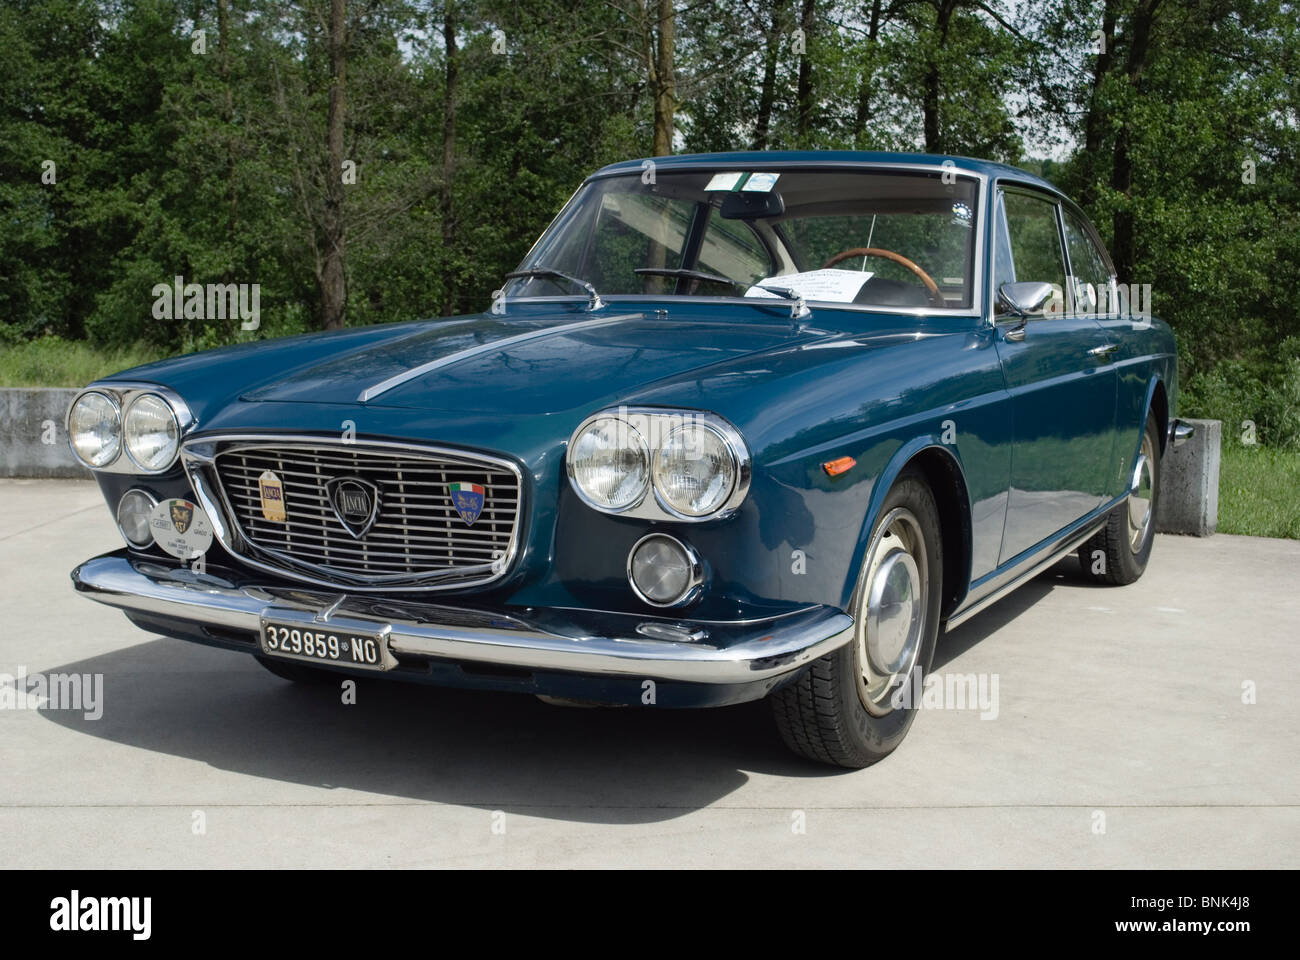 Old Lancia High Resolution Stock Photography and Images - Alamy